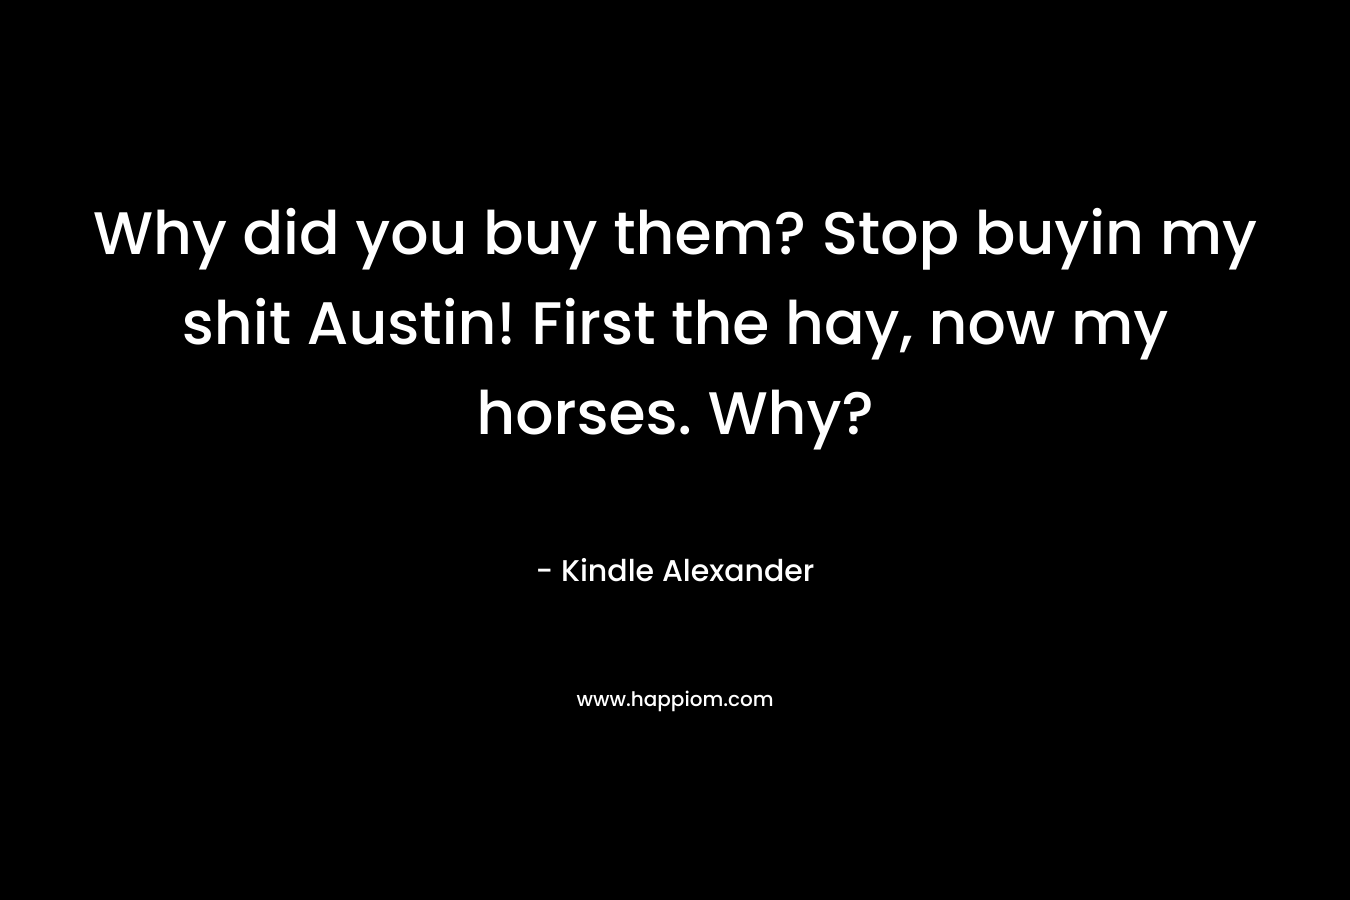 Why did you buy them? Stop buyin my shit Austin! First the hay, now my horses. Why?